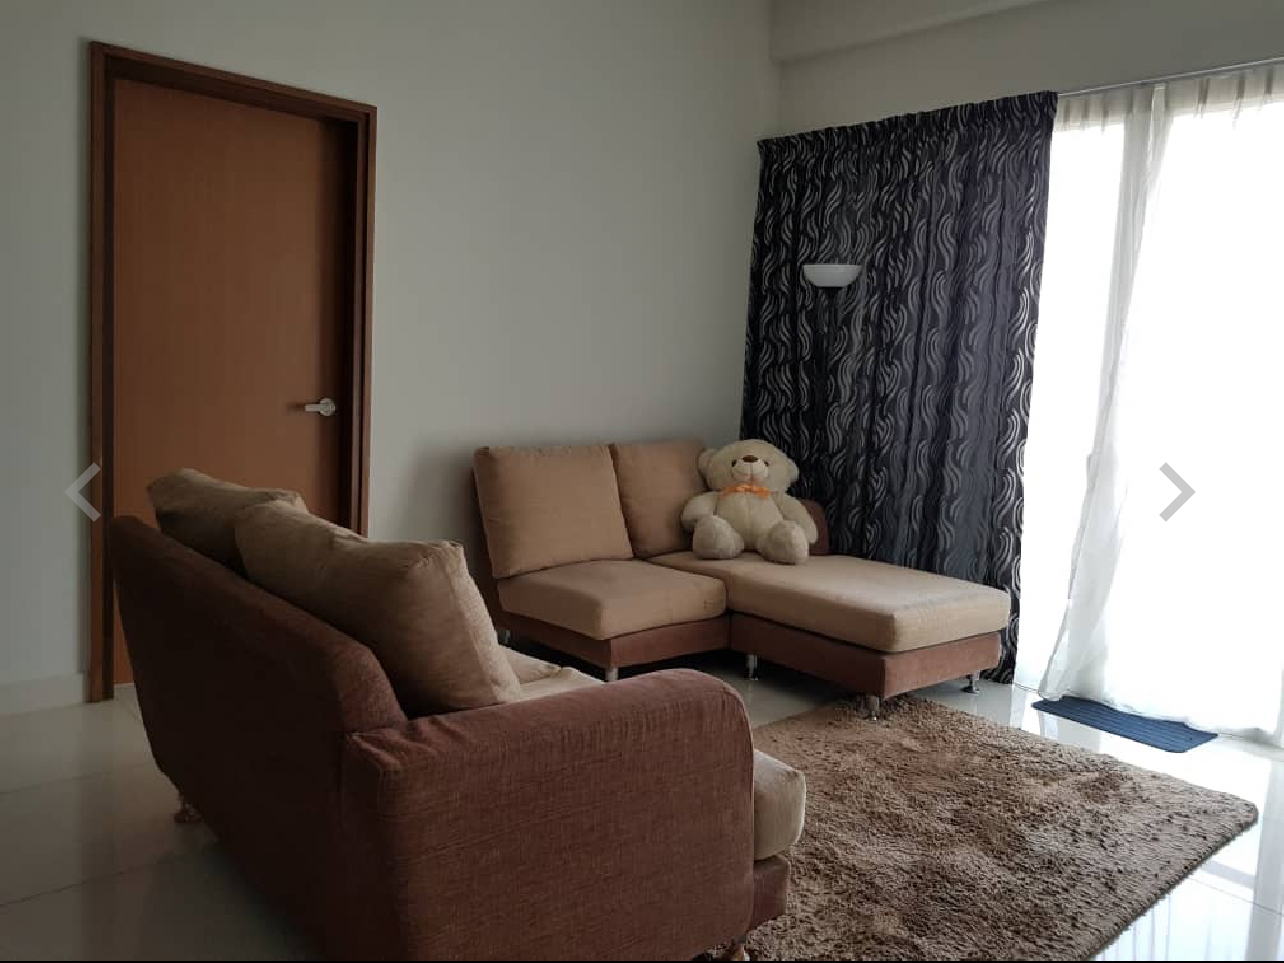 room for rent, studio, semenyih, Send the owner a message on WhatsApp/facebook if you want to RENT the unit(Mohammed Nhat)&Telegram(@muhammednhat101)